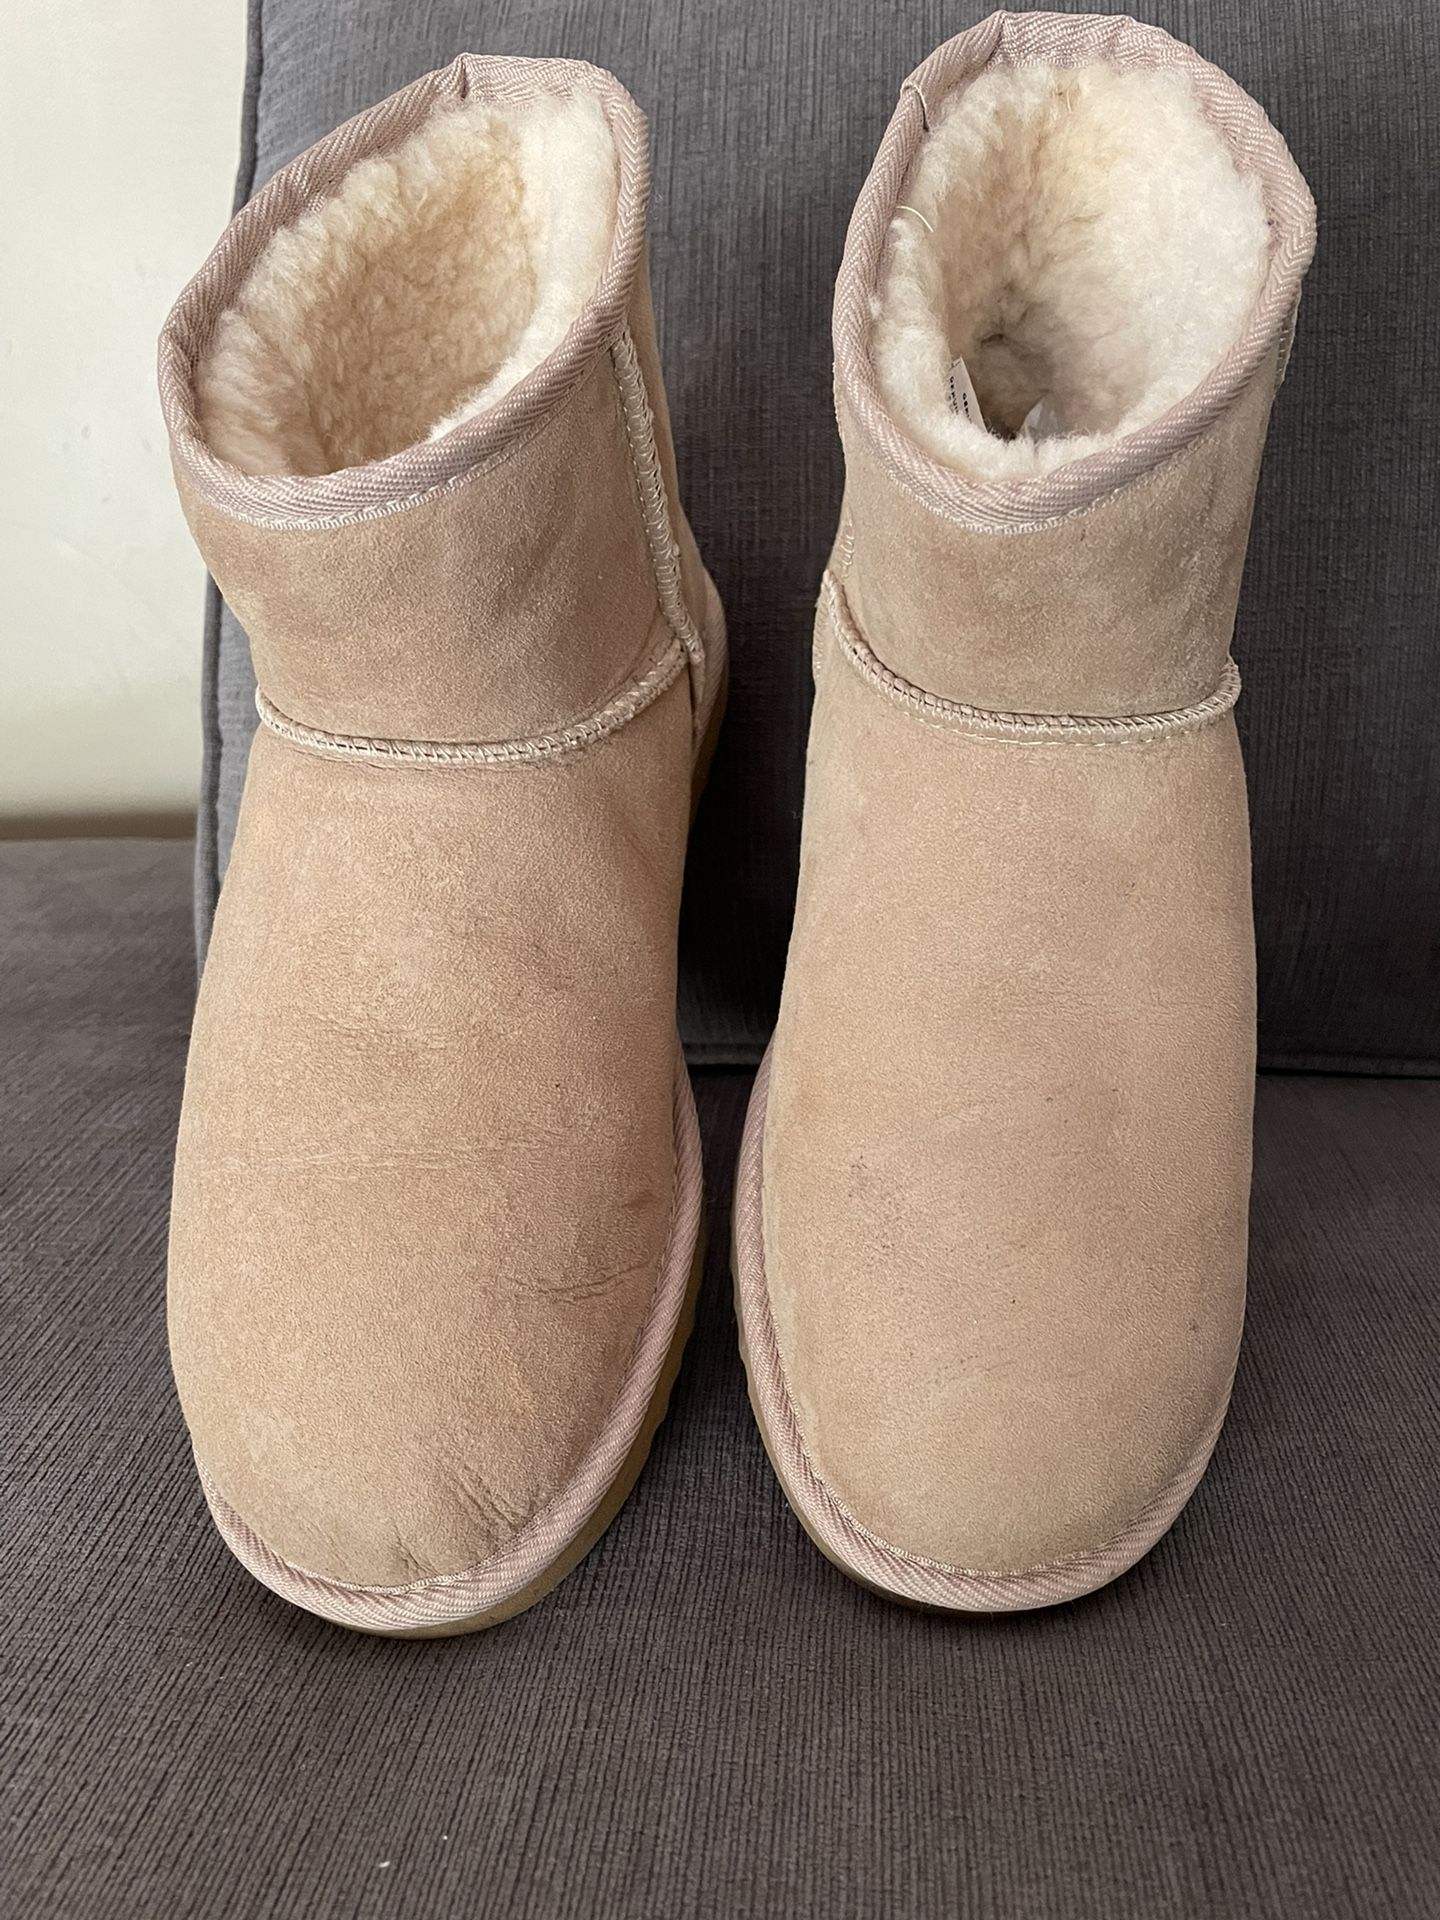 UGG Classic Mini Genuine Shearling Lined Boot, Tan Color, Size 9